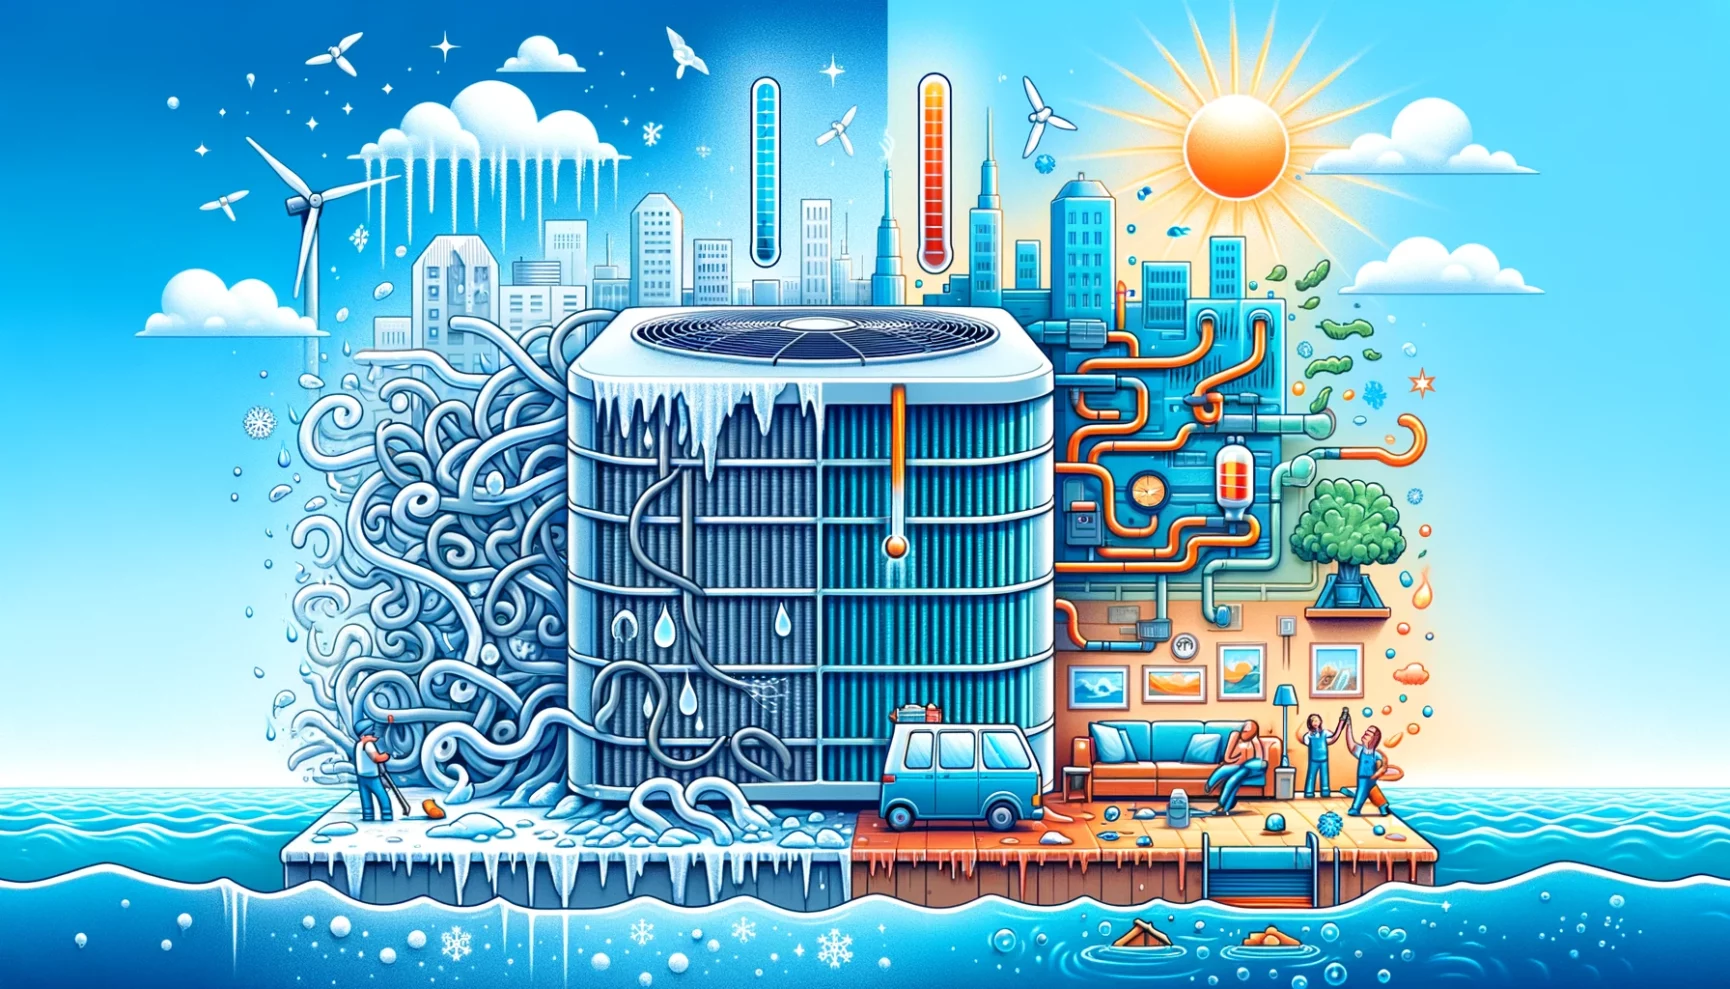 An illustrated conceptualization of sustainable energy and eco-friendly urban living with a focus on renewable resources and green technologies.